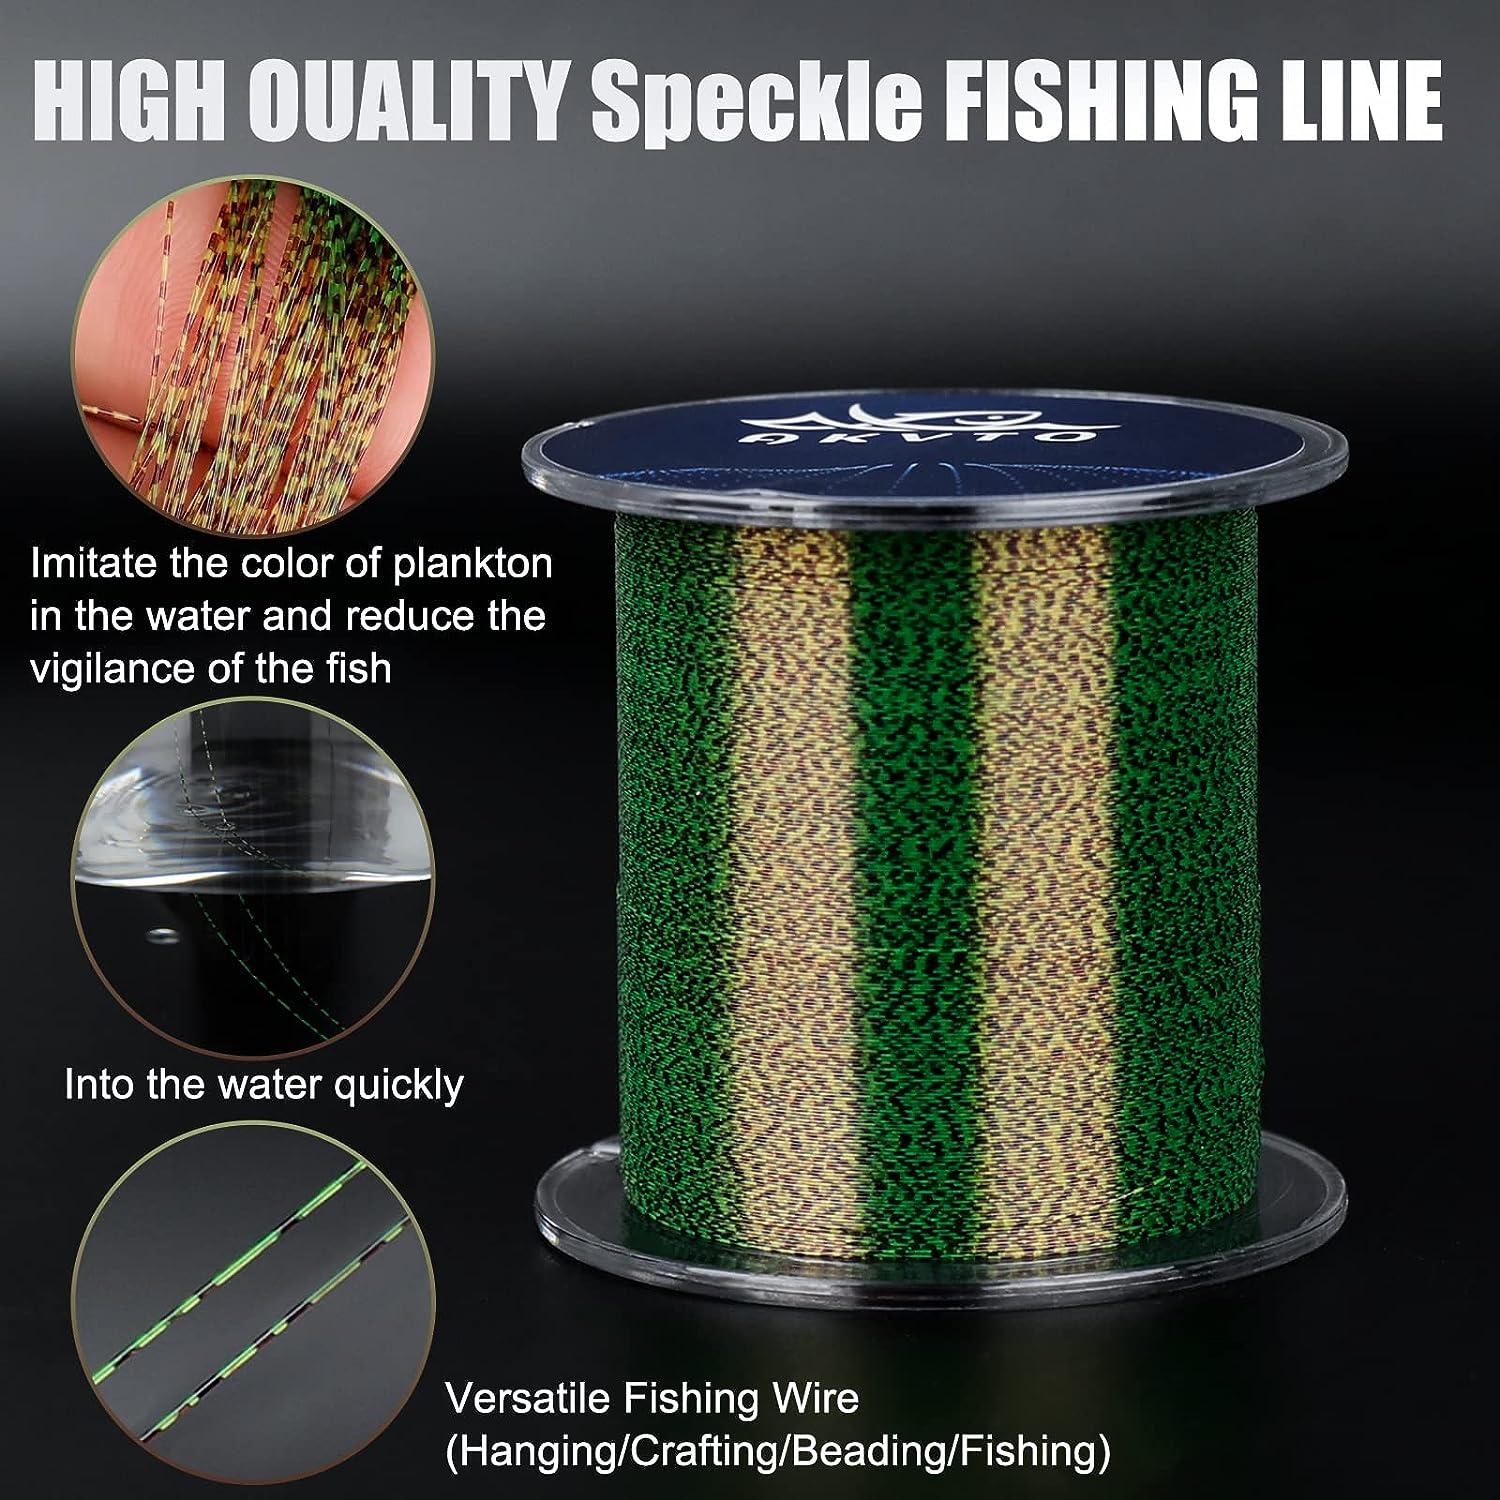 AKvto Spotted Monofilament Fishing Line - Premium nylon material is strong  and abrasion resistant, invisible camouflage fishing line 300Yds, suitable  for freshwater and saltwater fishing line 10-35LB. 0.30MM/15LB/300YDS  Gradient Fishing Line